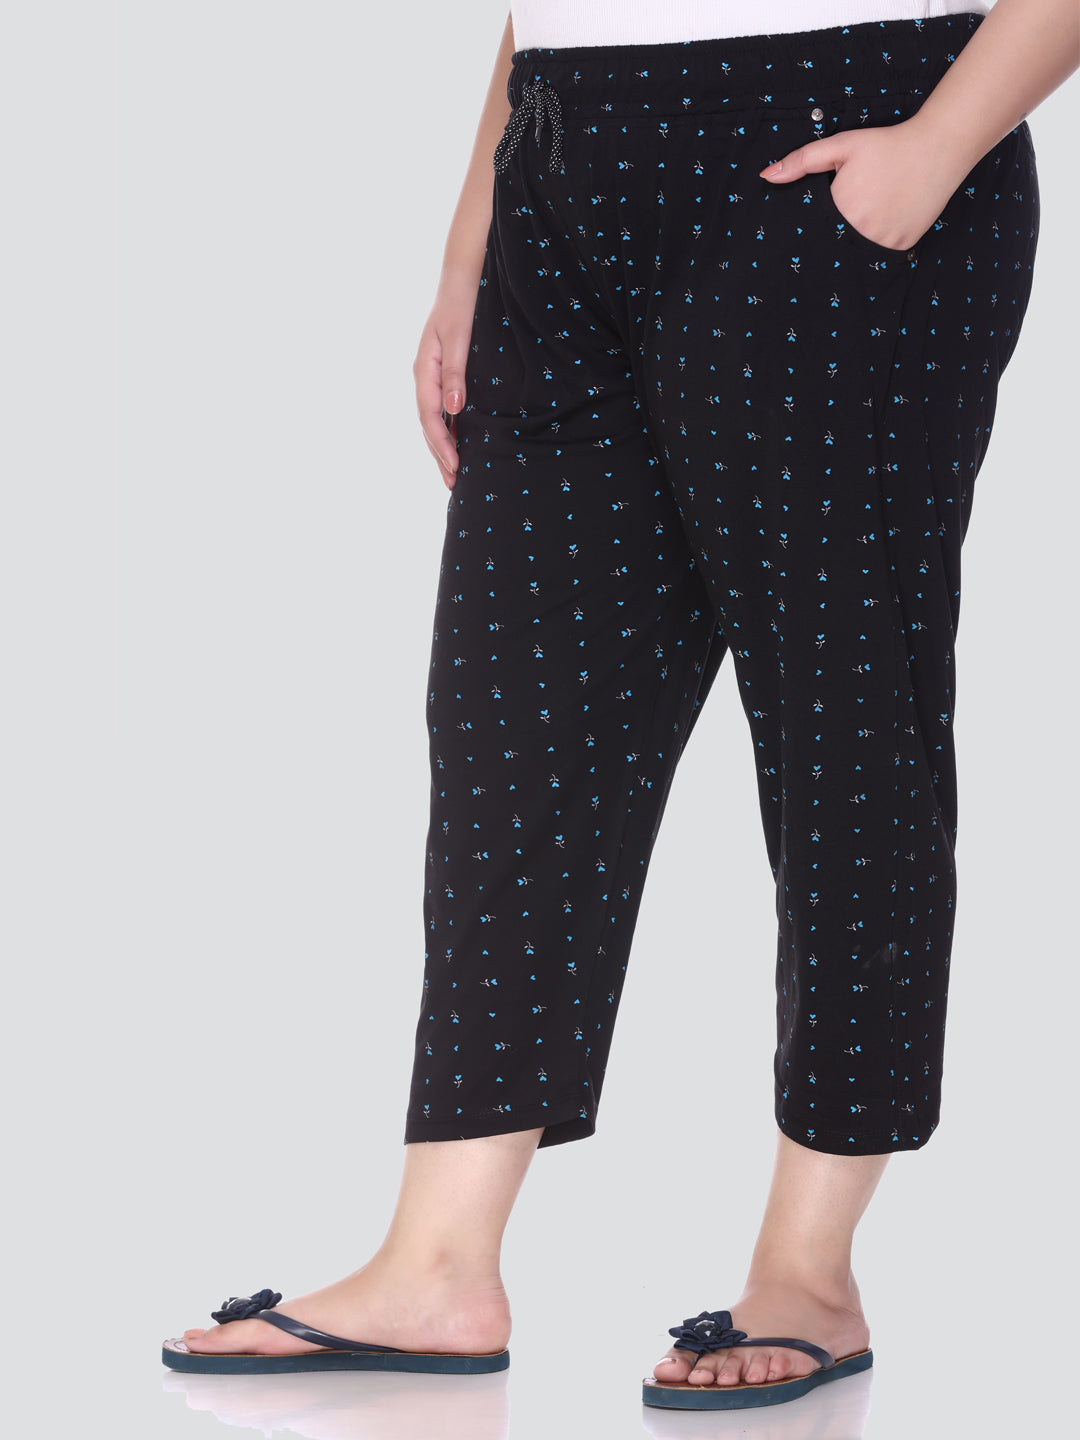 Stylish Printed Plus Size Capri And Pajama For Women Online In India 